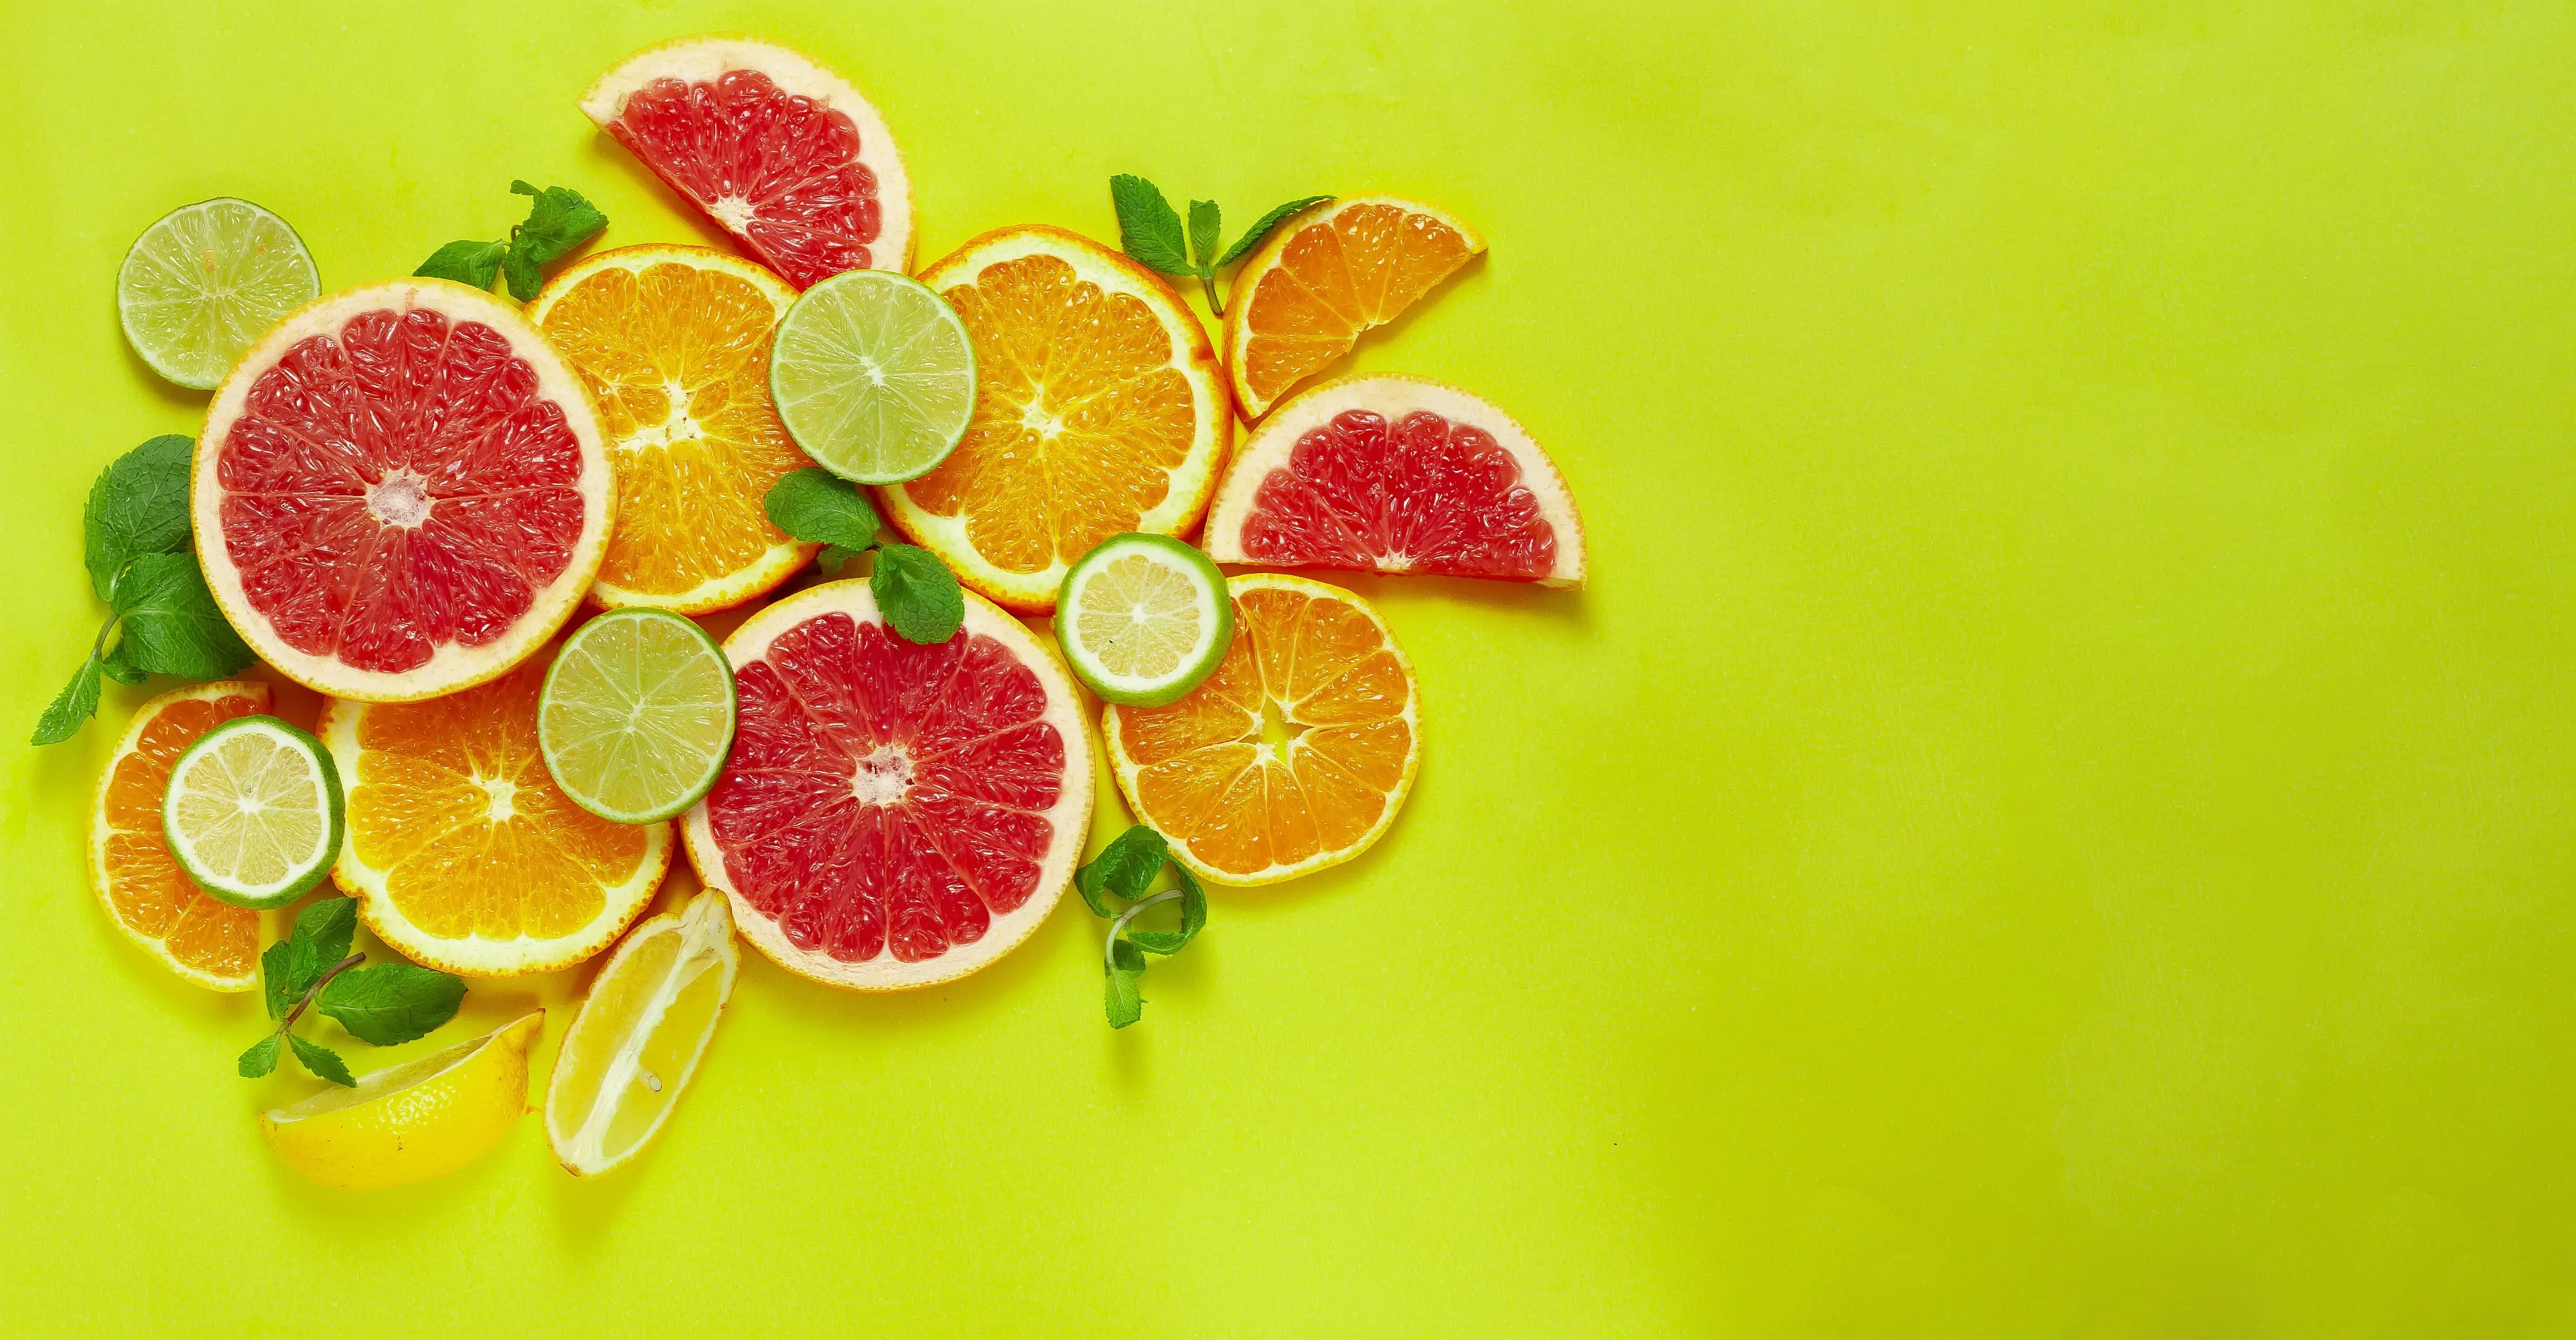 Assortment of citrus fruits on yellow background